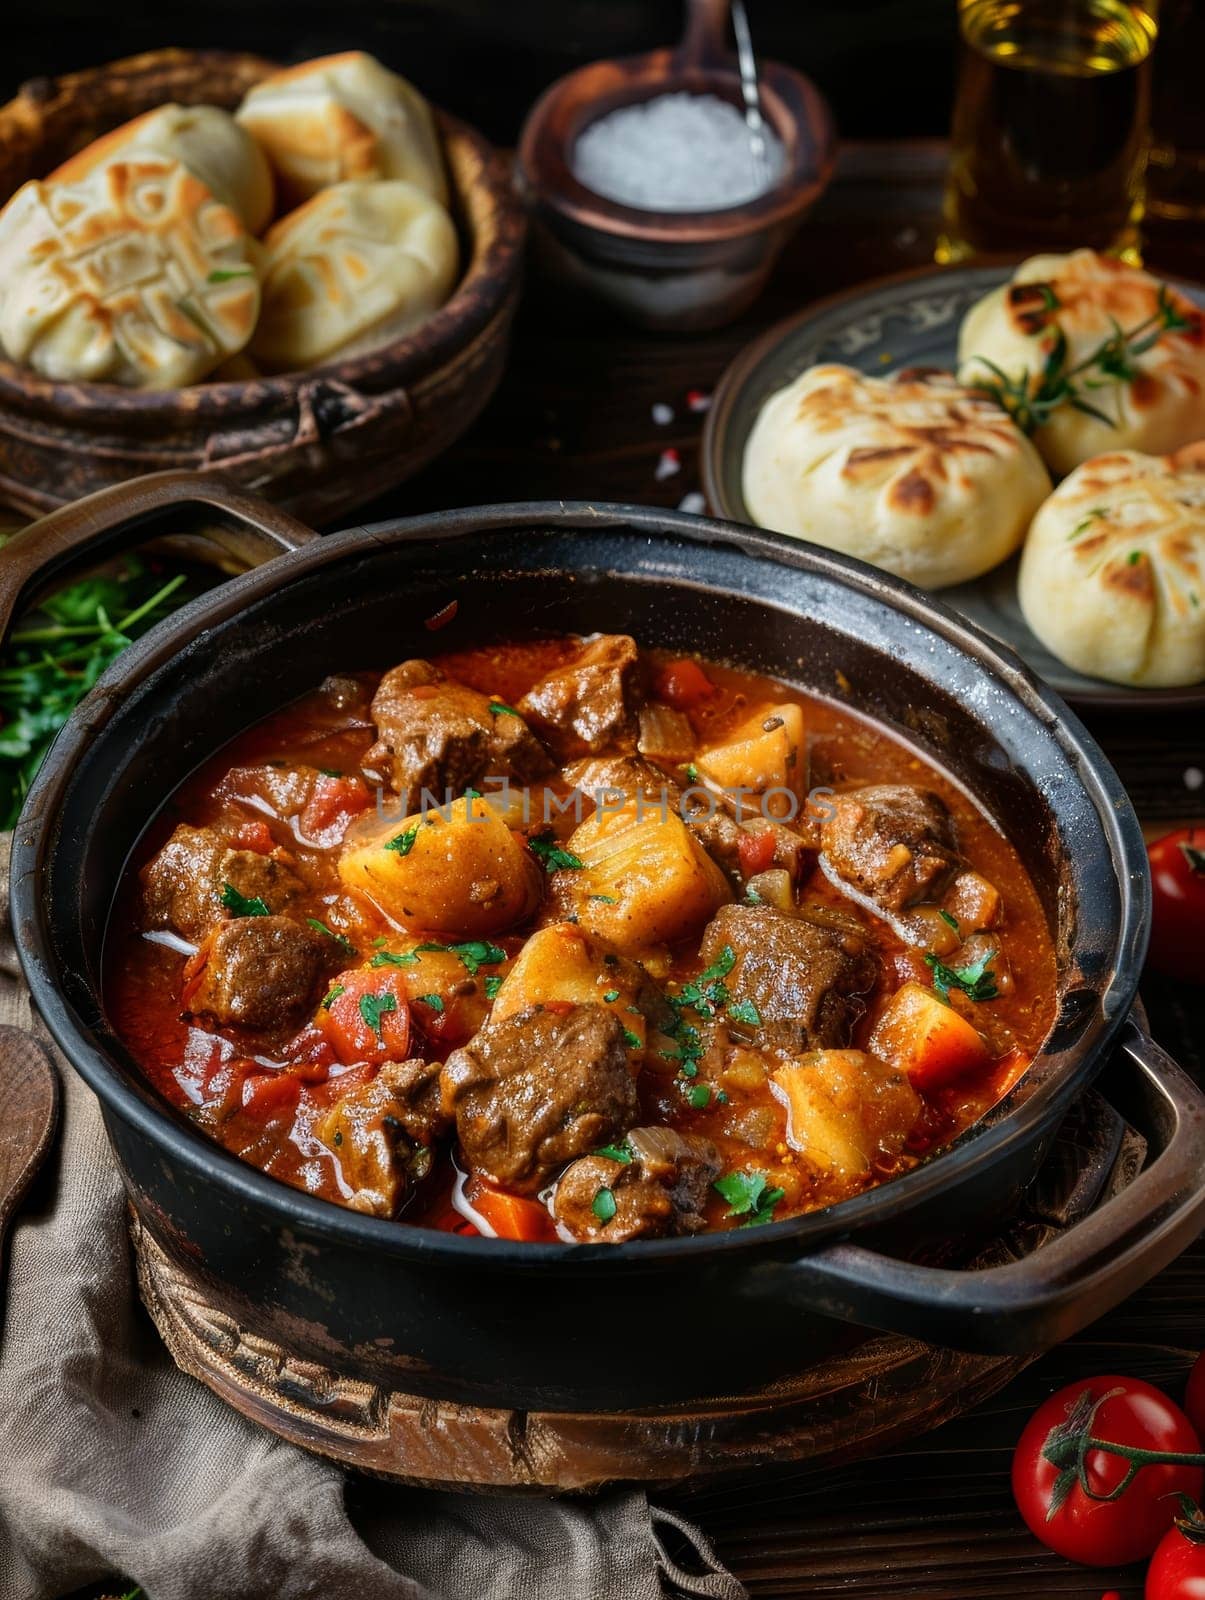 Hungarian goulash in a rustic stew pot, served with a side of fluffy dumplings. A hearty and comforting dish from Hungary. by sfinks